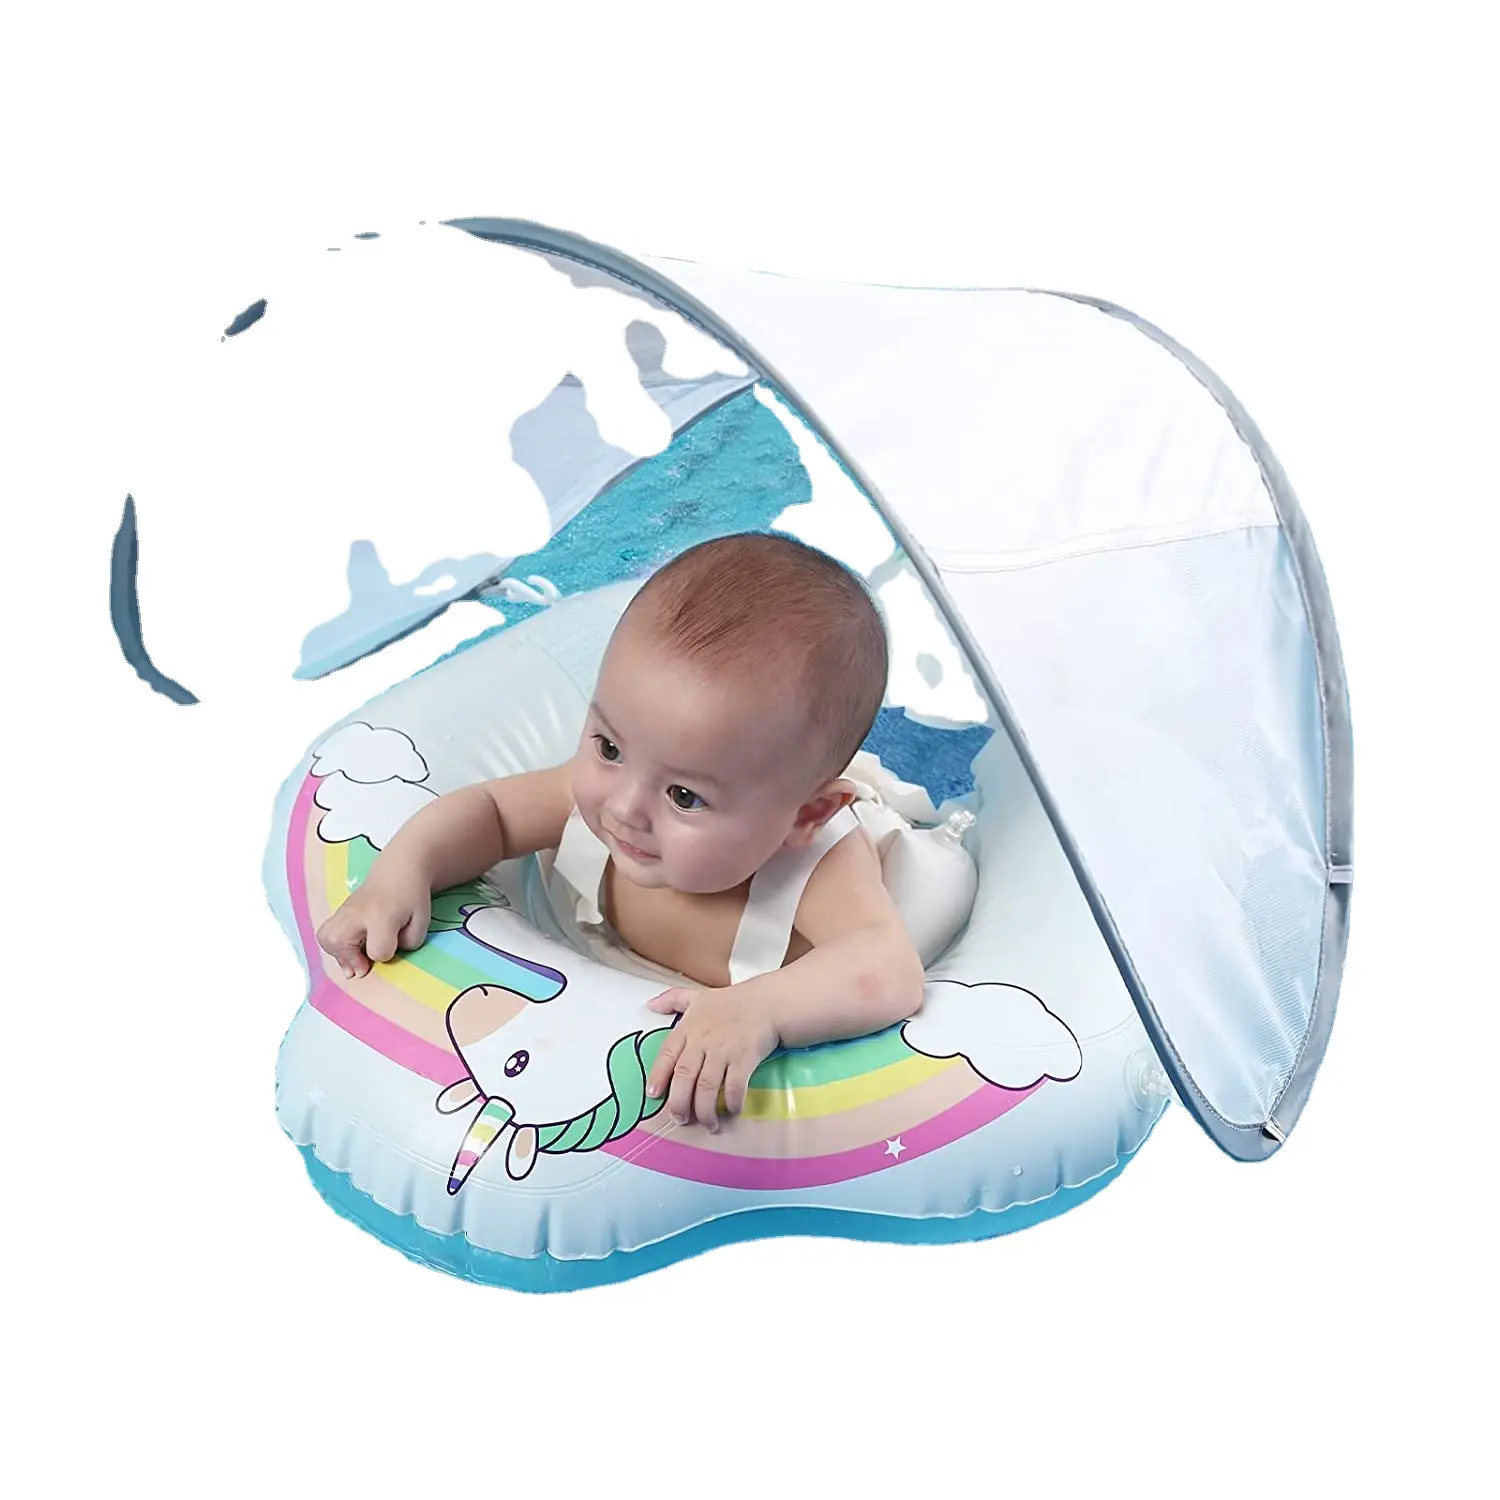 Unicorn Baby Swimming Floats for Toddlers Inflatable Baby Pool Floats Ring baby swimming float with canopy